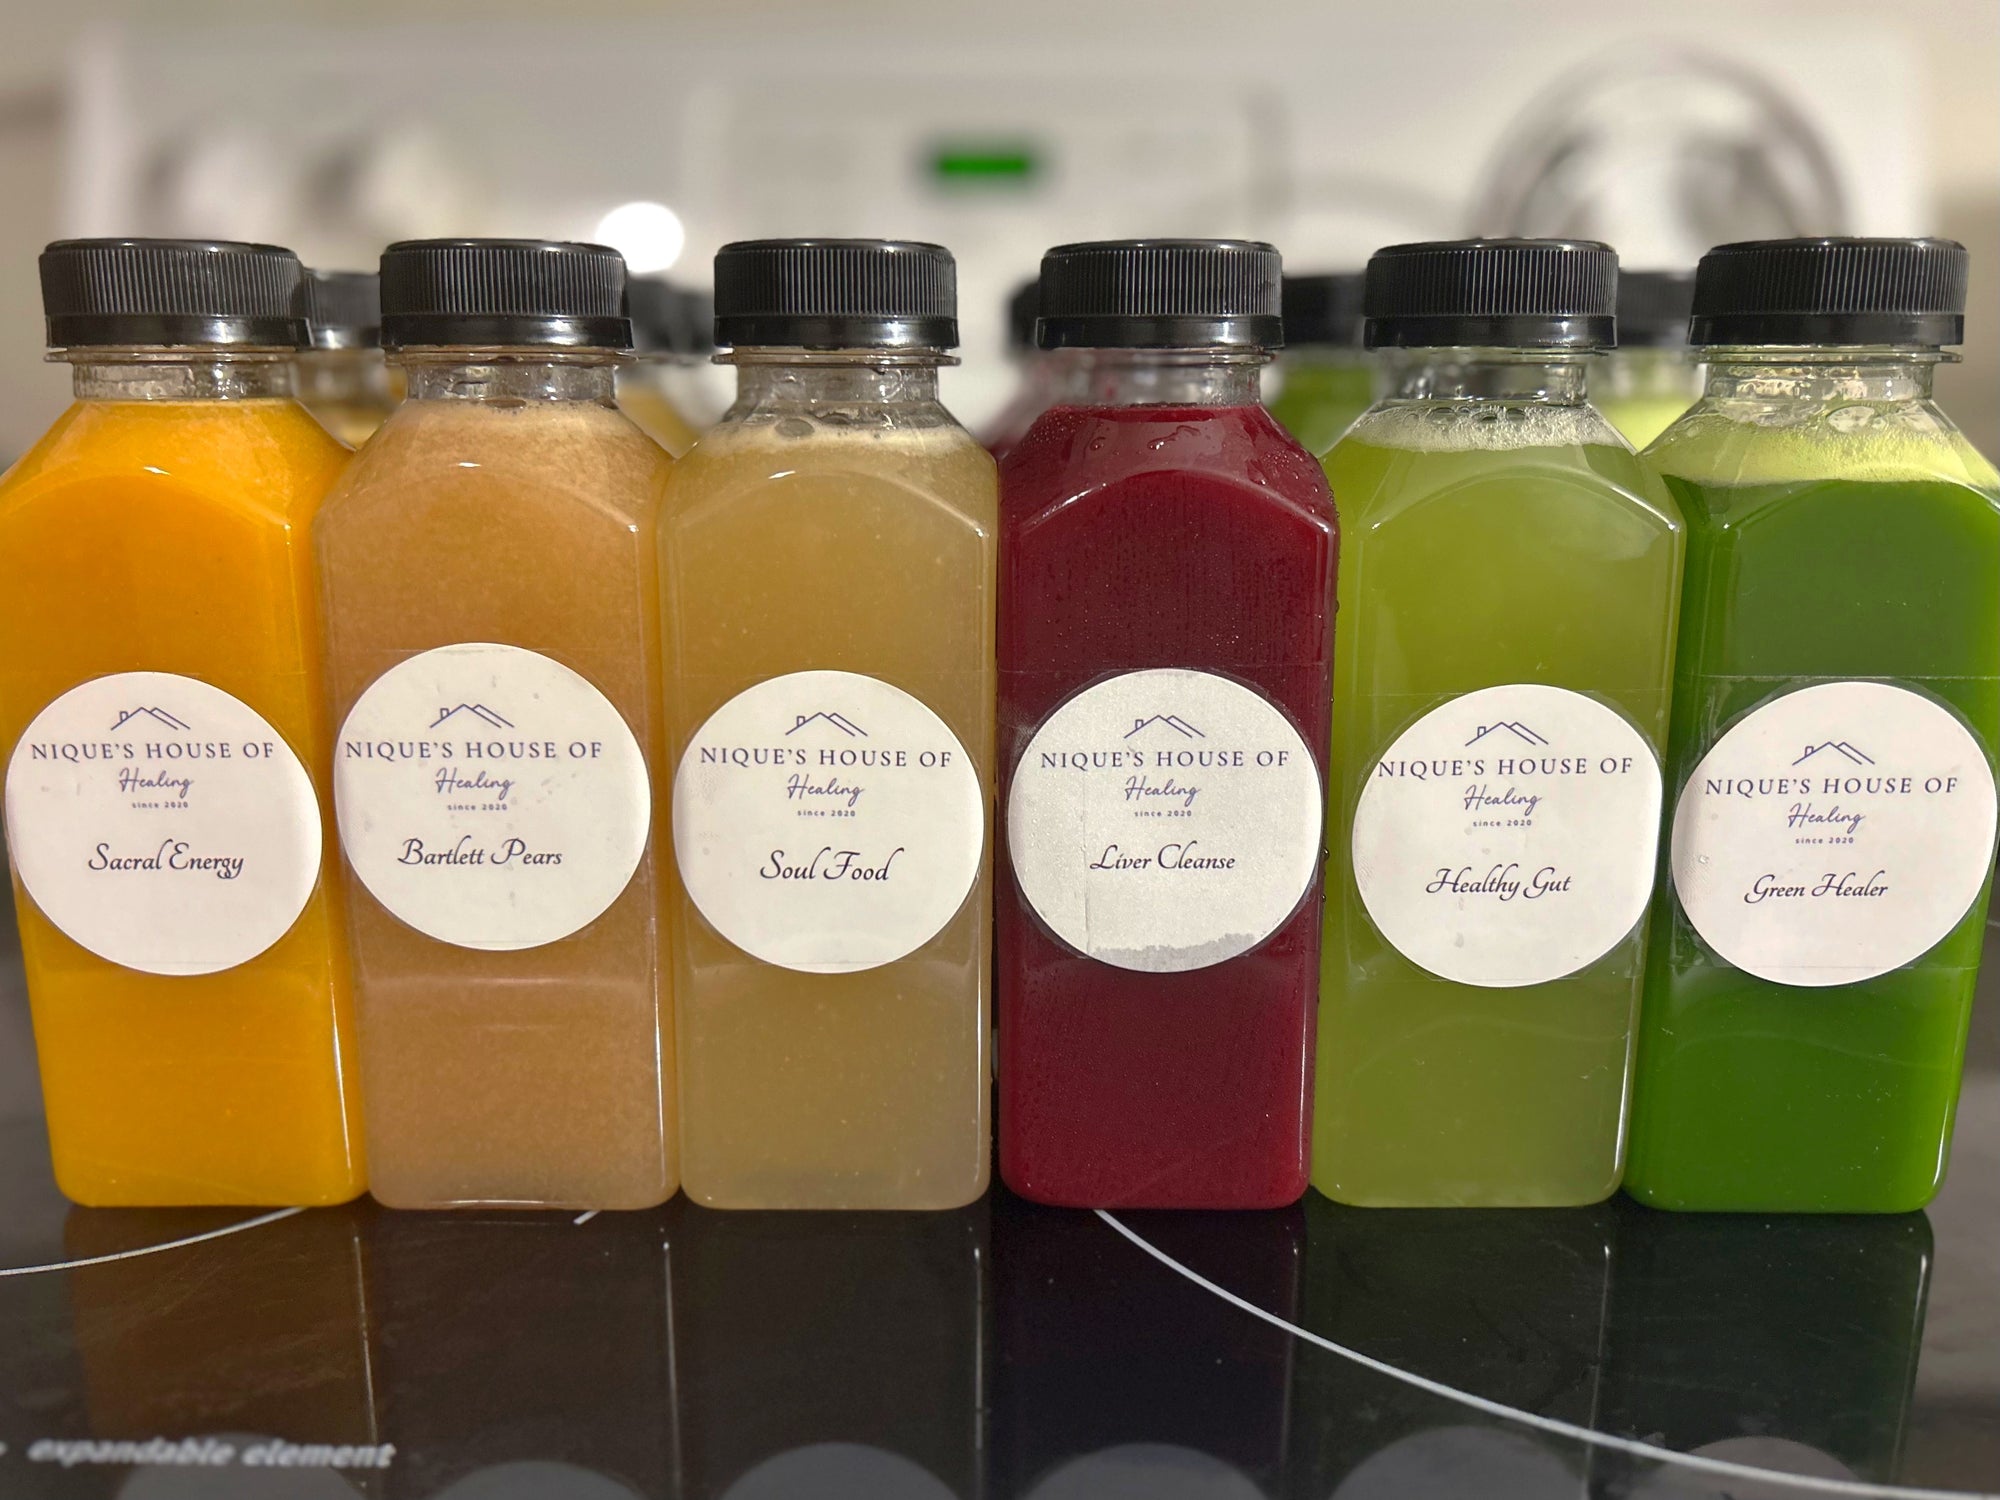 2 day juice cleanse - Nique's House of Healing